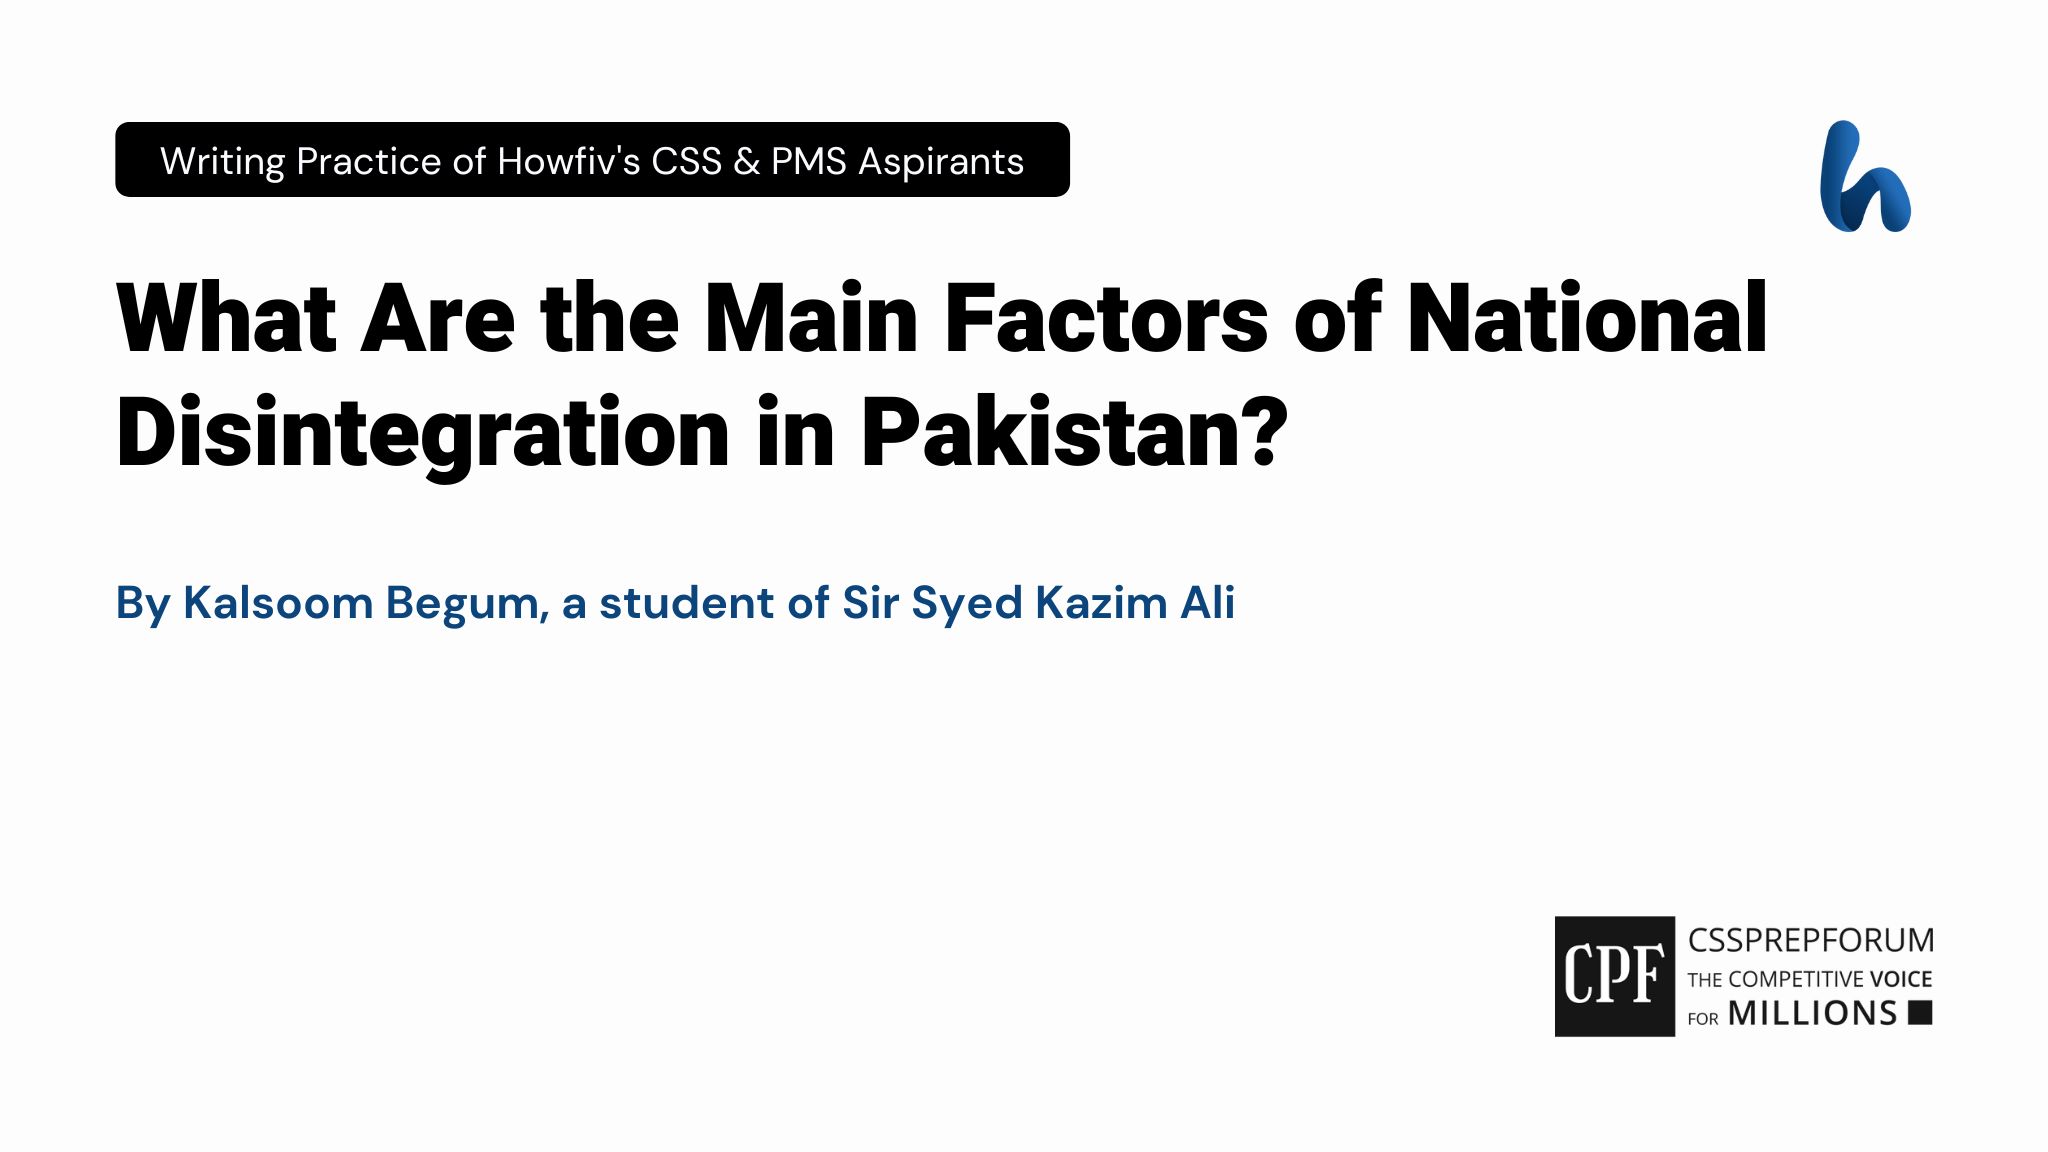 What Are the Main Factors of National Disintegration in Pakistan